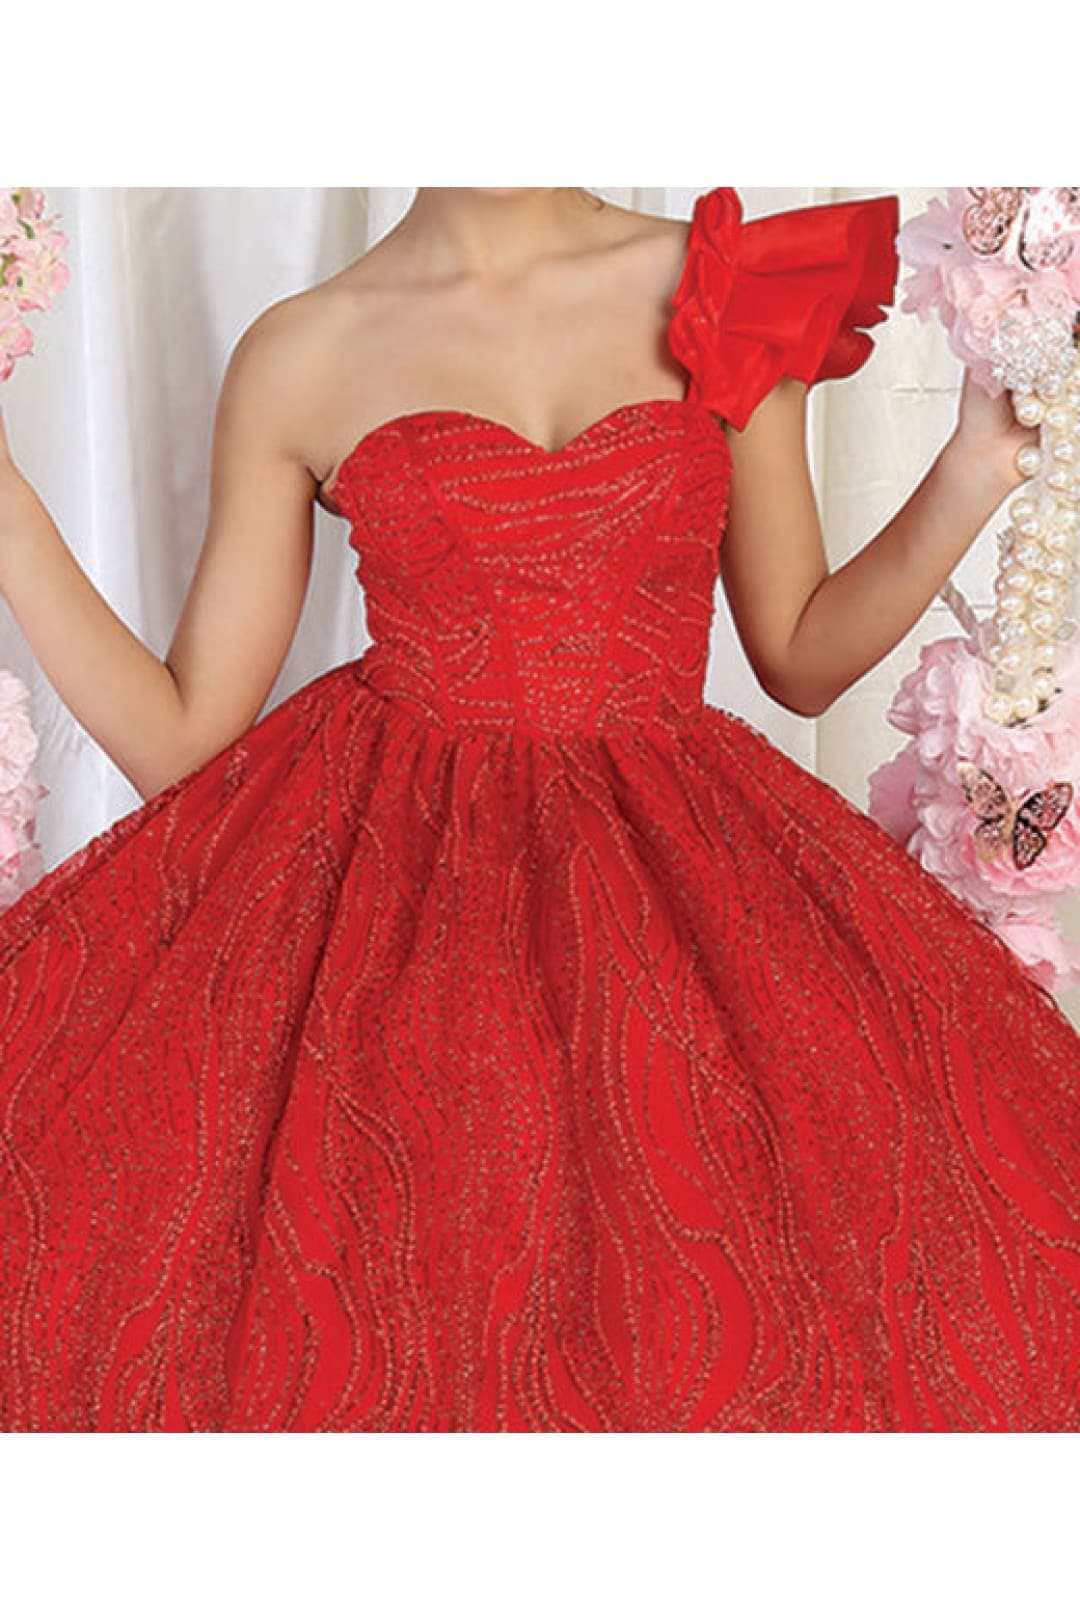 Layla K LK203 One Shoulder Quince Ball Gown